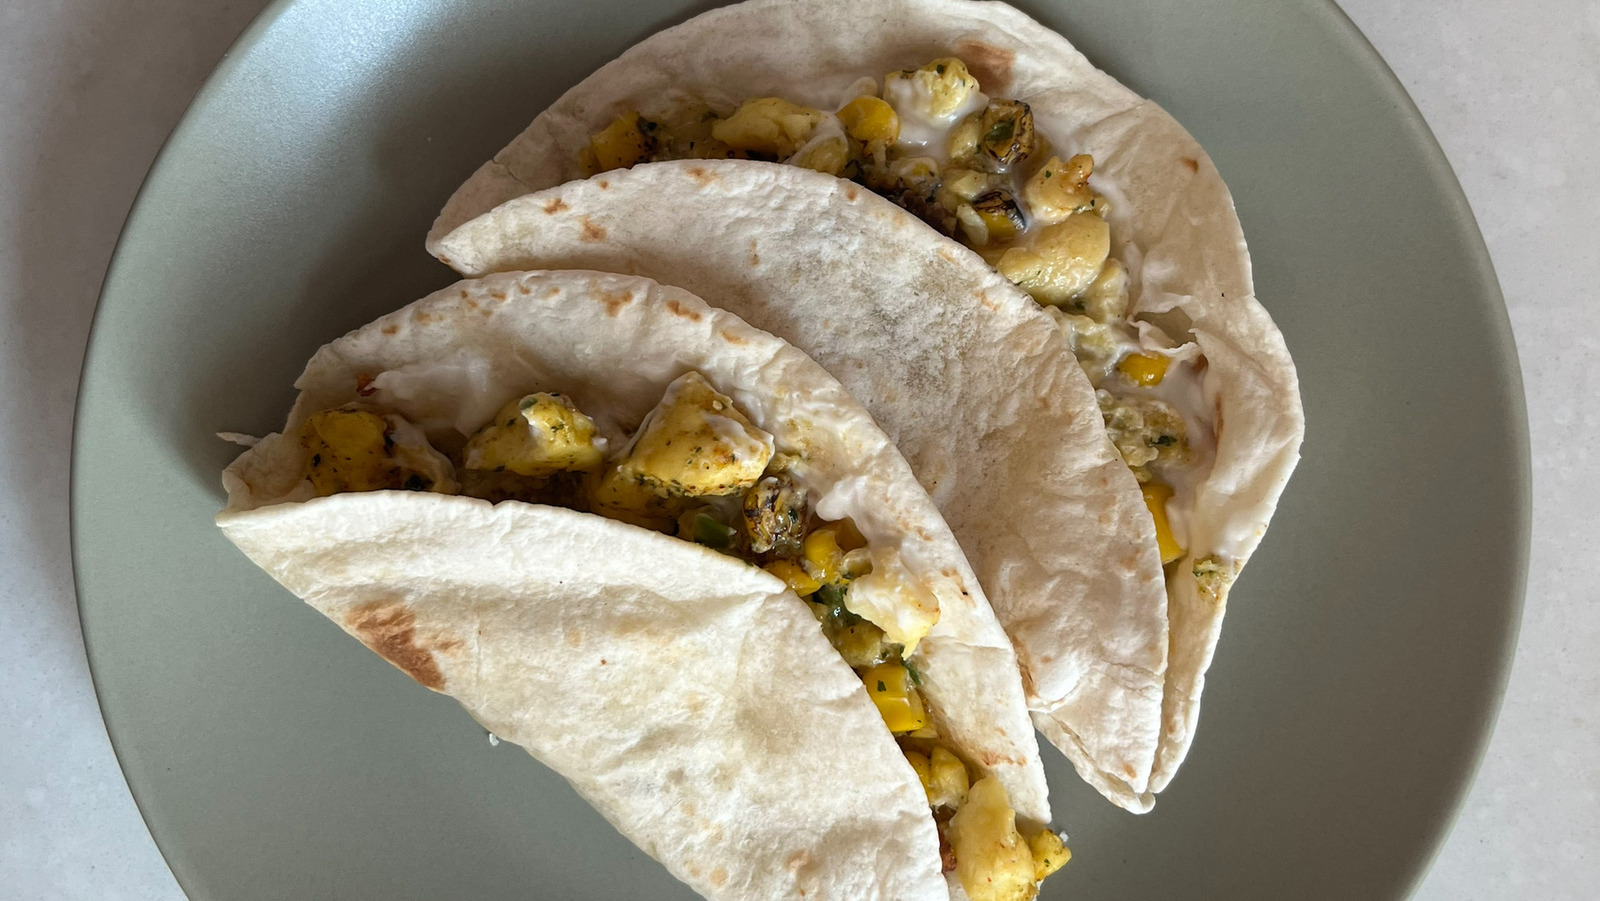 Dunkin’s Breakfast Tacos Are Surprisingly Tasty – The Daily Meal